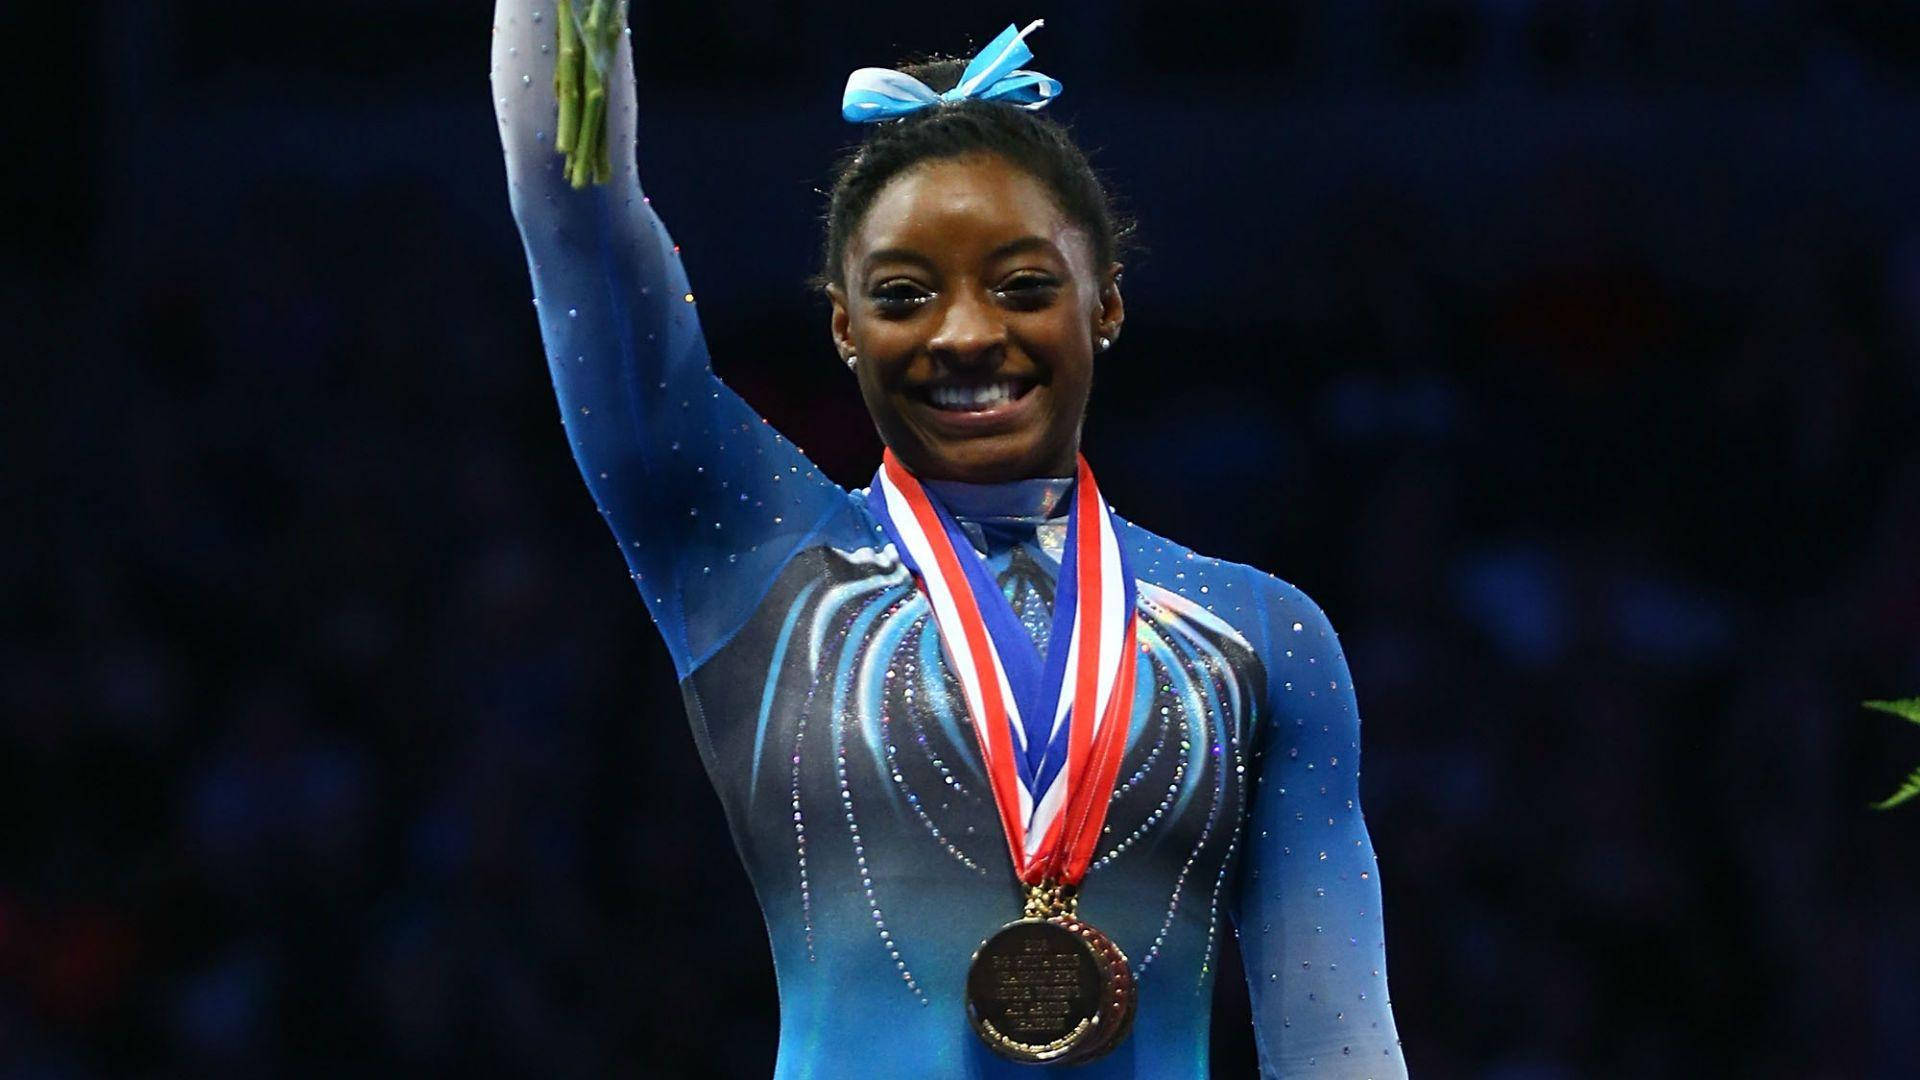 Olympic Gold Medal Gymnast Simone Biles Flawlessly Executing Her Routine